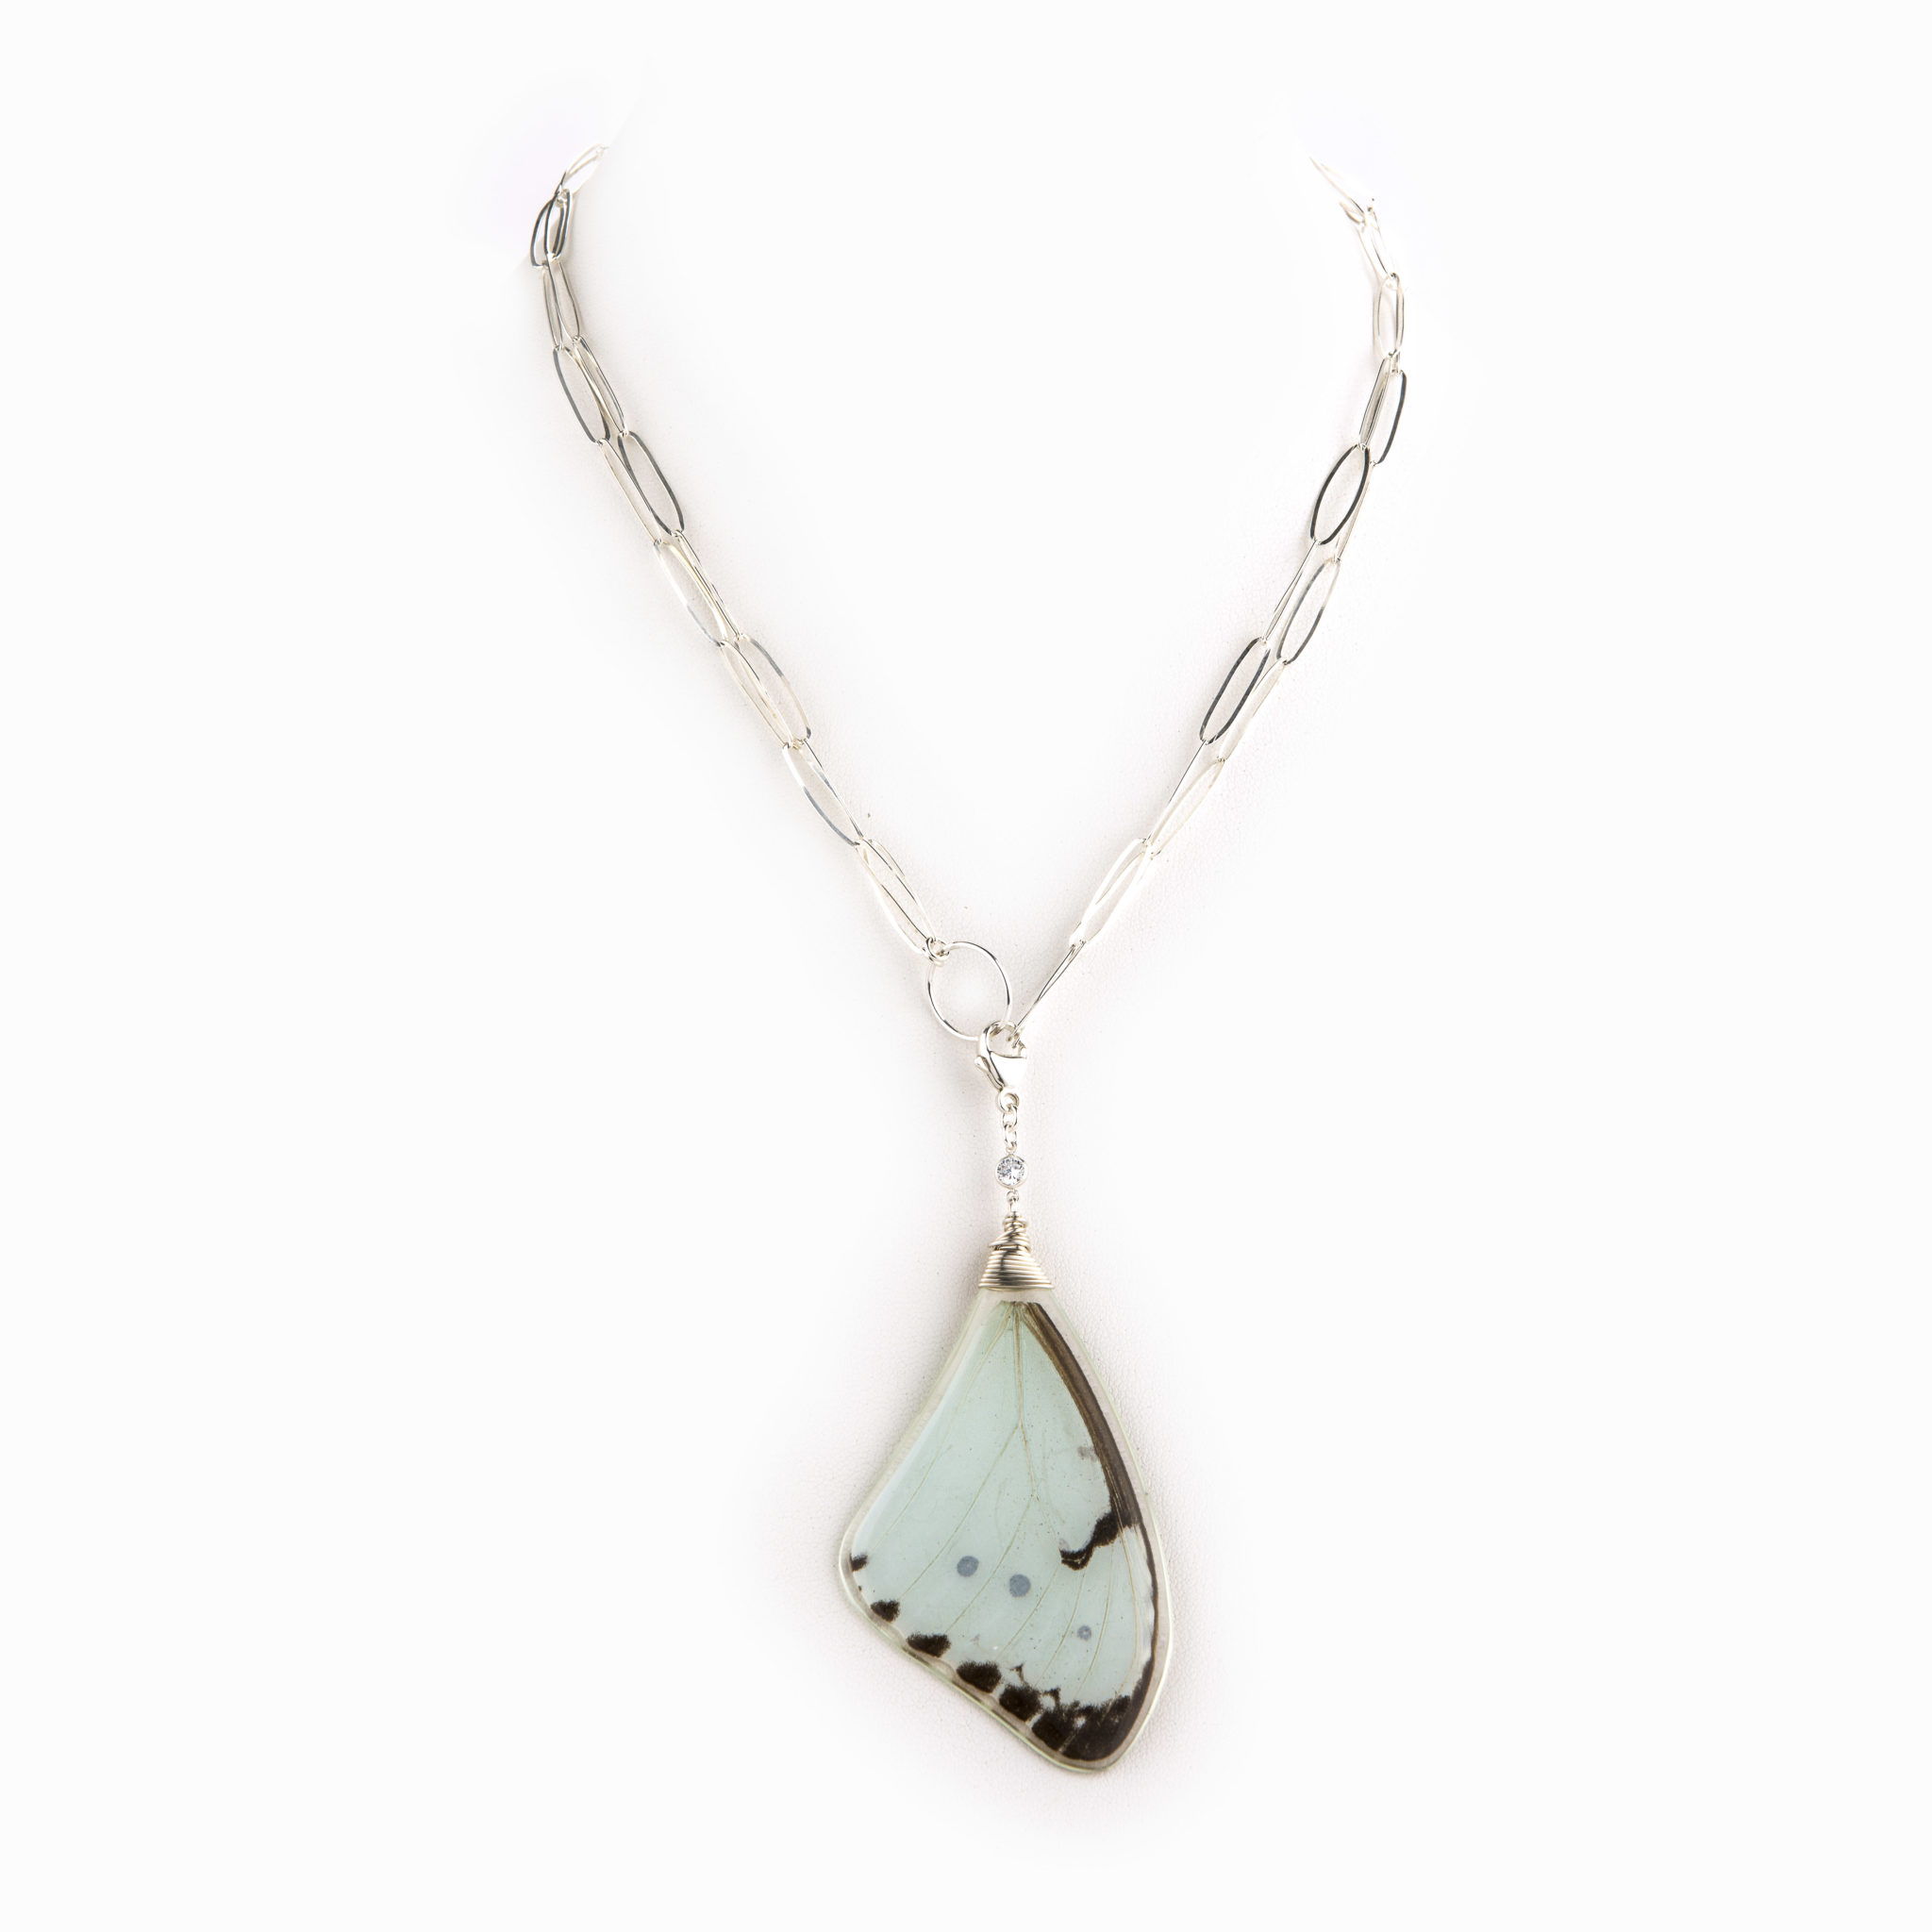 A delicate and thin sterling silver paper clip chain with light blue butterfly wing charm.